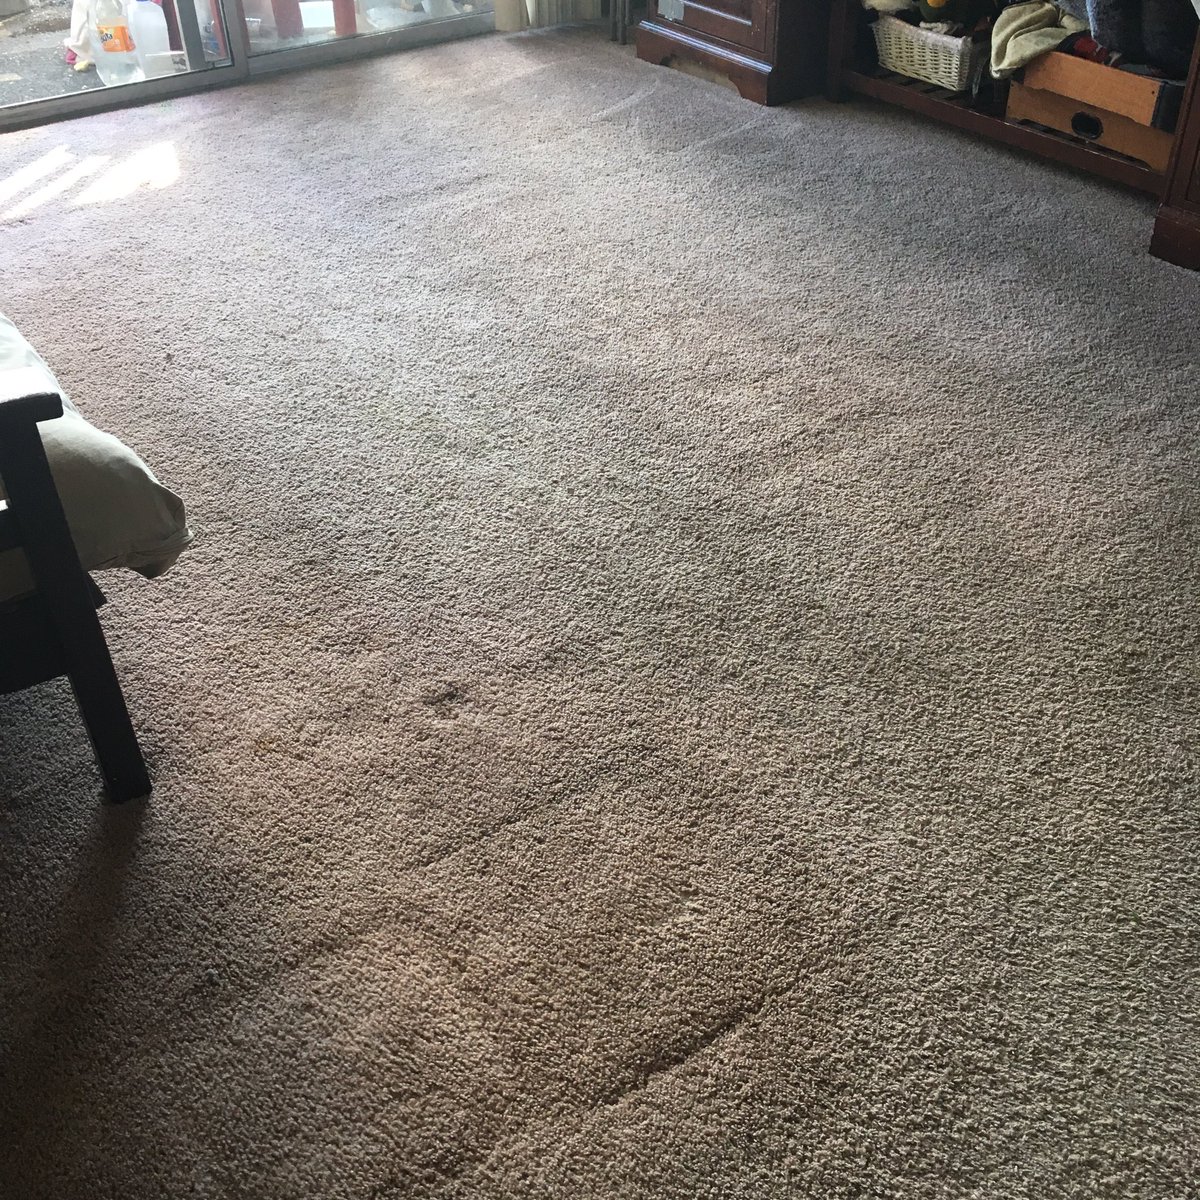 Bought a #carpet cleaner and started #oneroomatatime Needs to be done twice but is better already!   
#cleaning #homemaking  #kidsaremessy